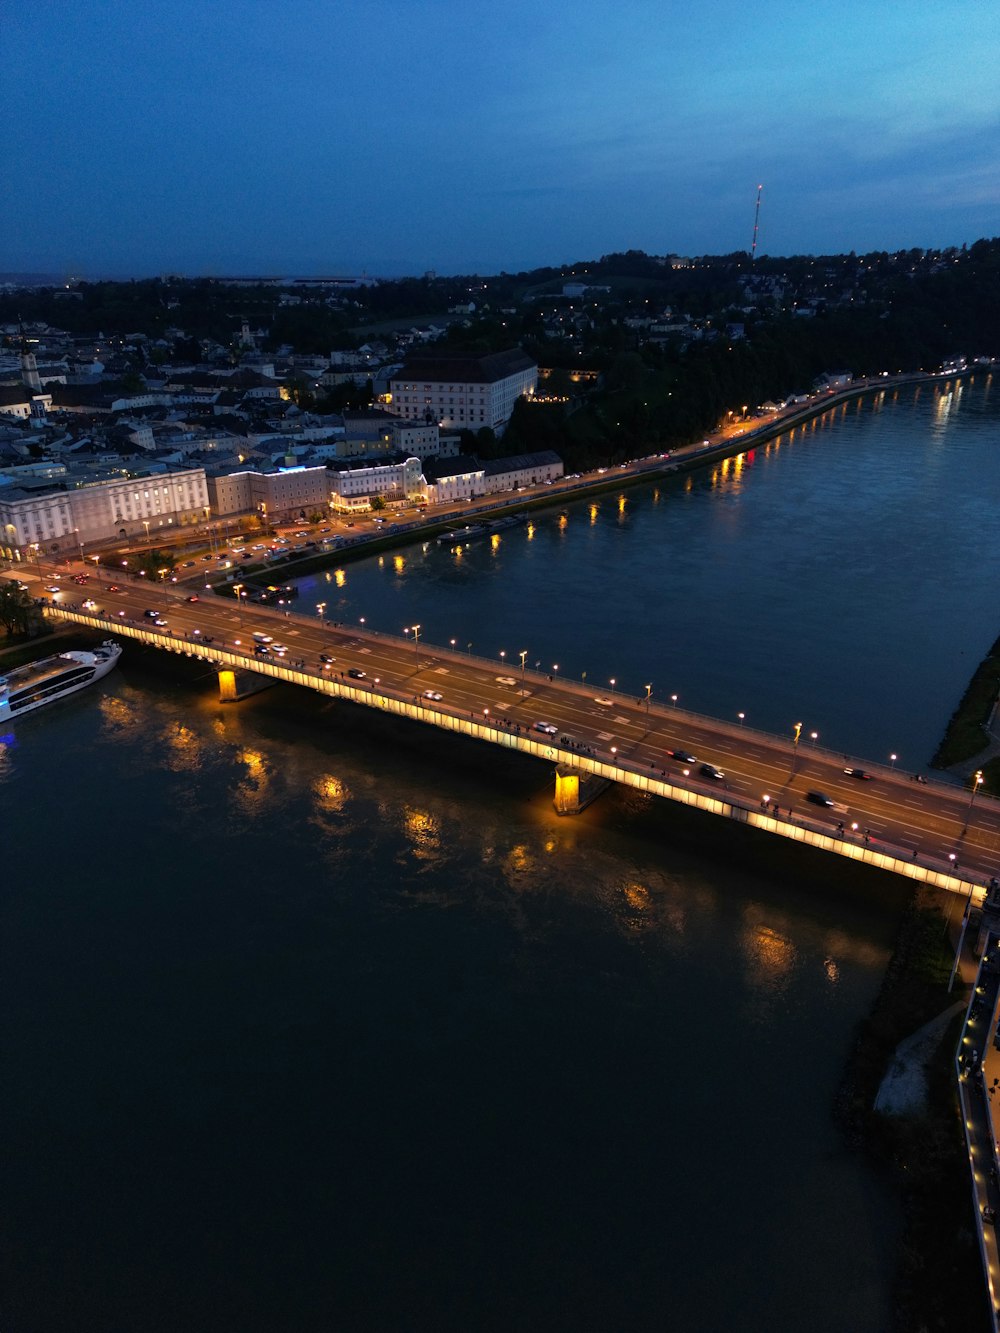 an aerial view of a bridge over a river at night